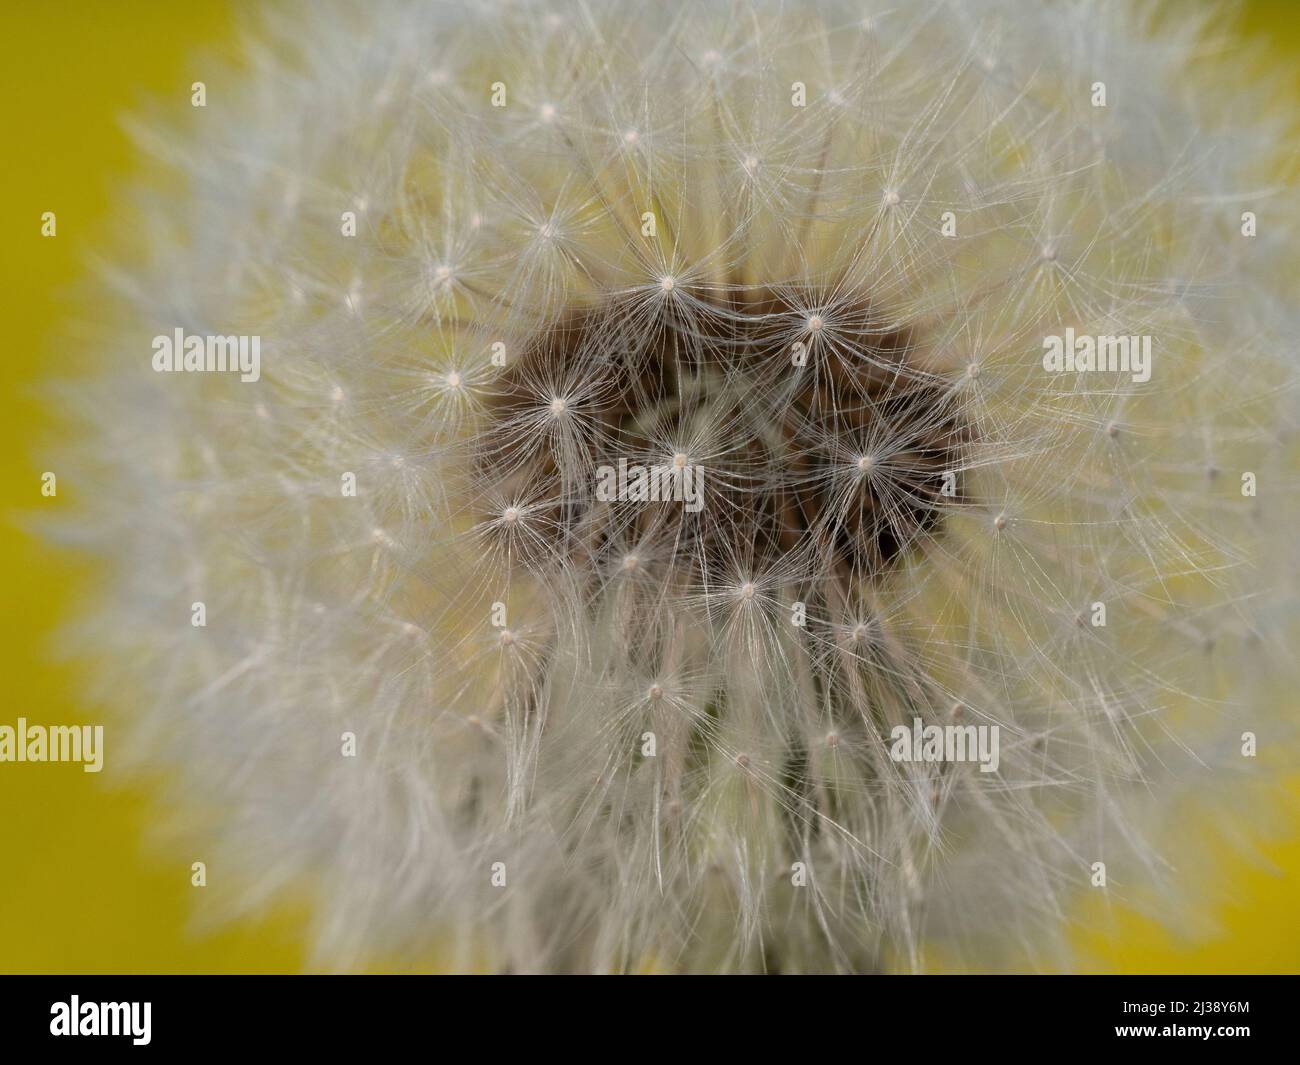 Image-filling macro photo of a dandelion against a yellow background Stock Photo